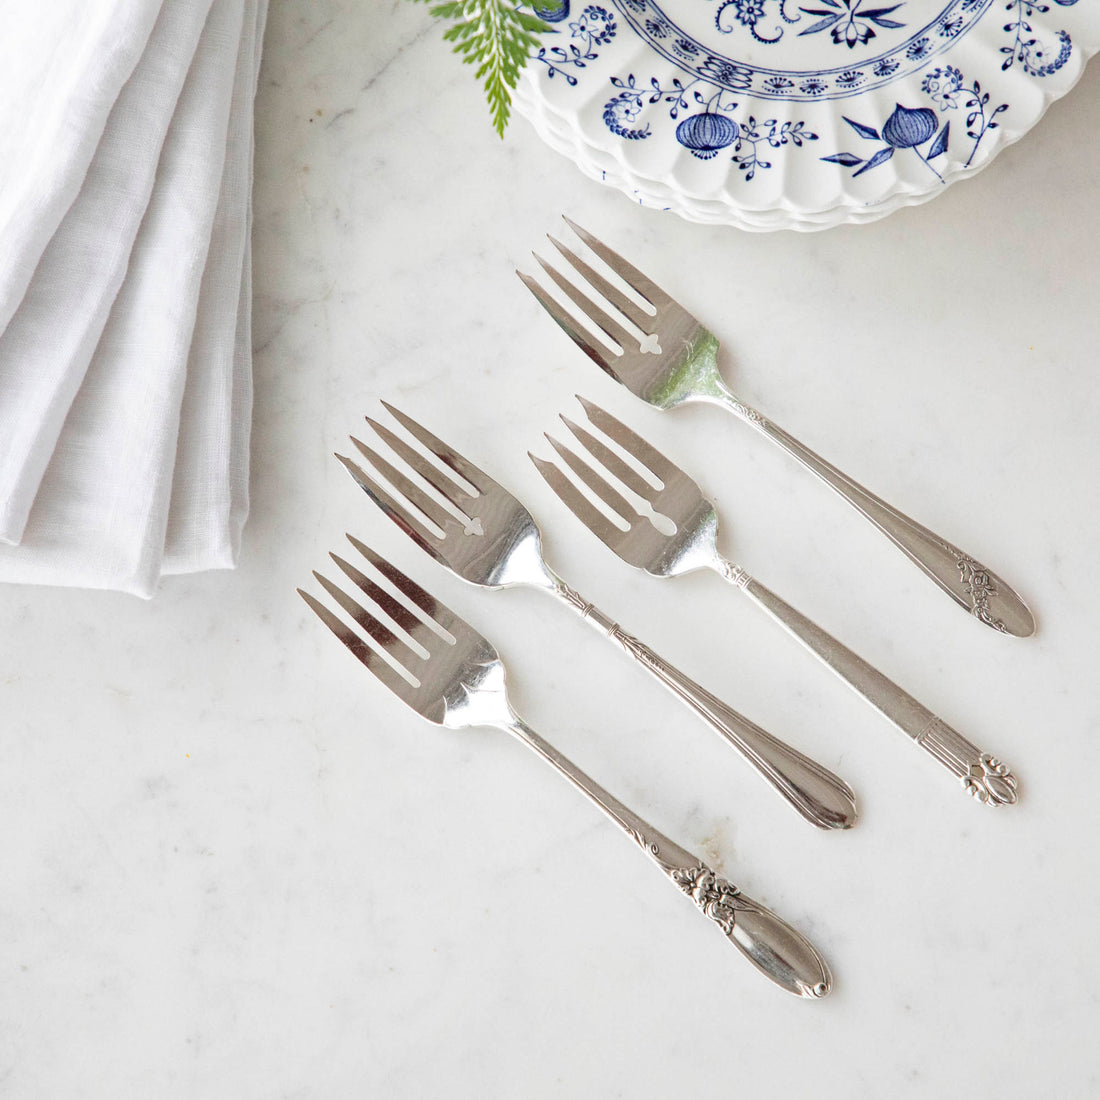 Four Hester &amp; Cook vintage silver-plate salad forks beside a blue and white patterned plate with a white napkin and a sprig of greenery.